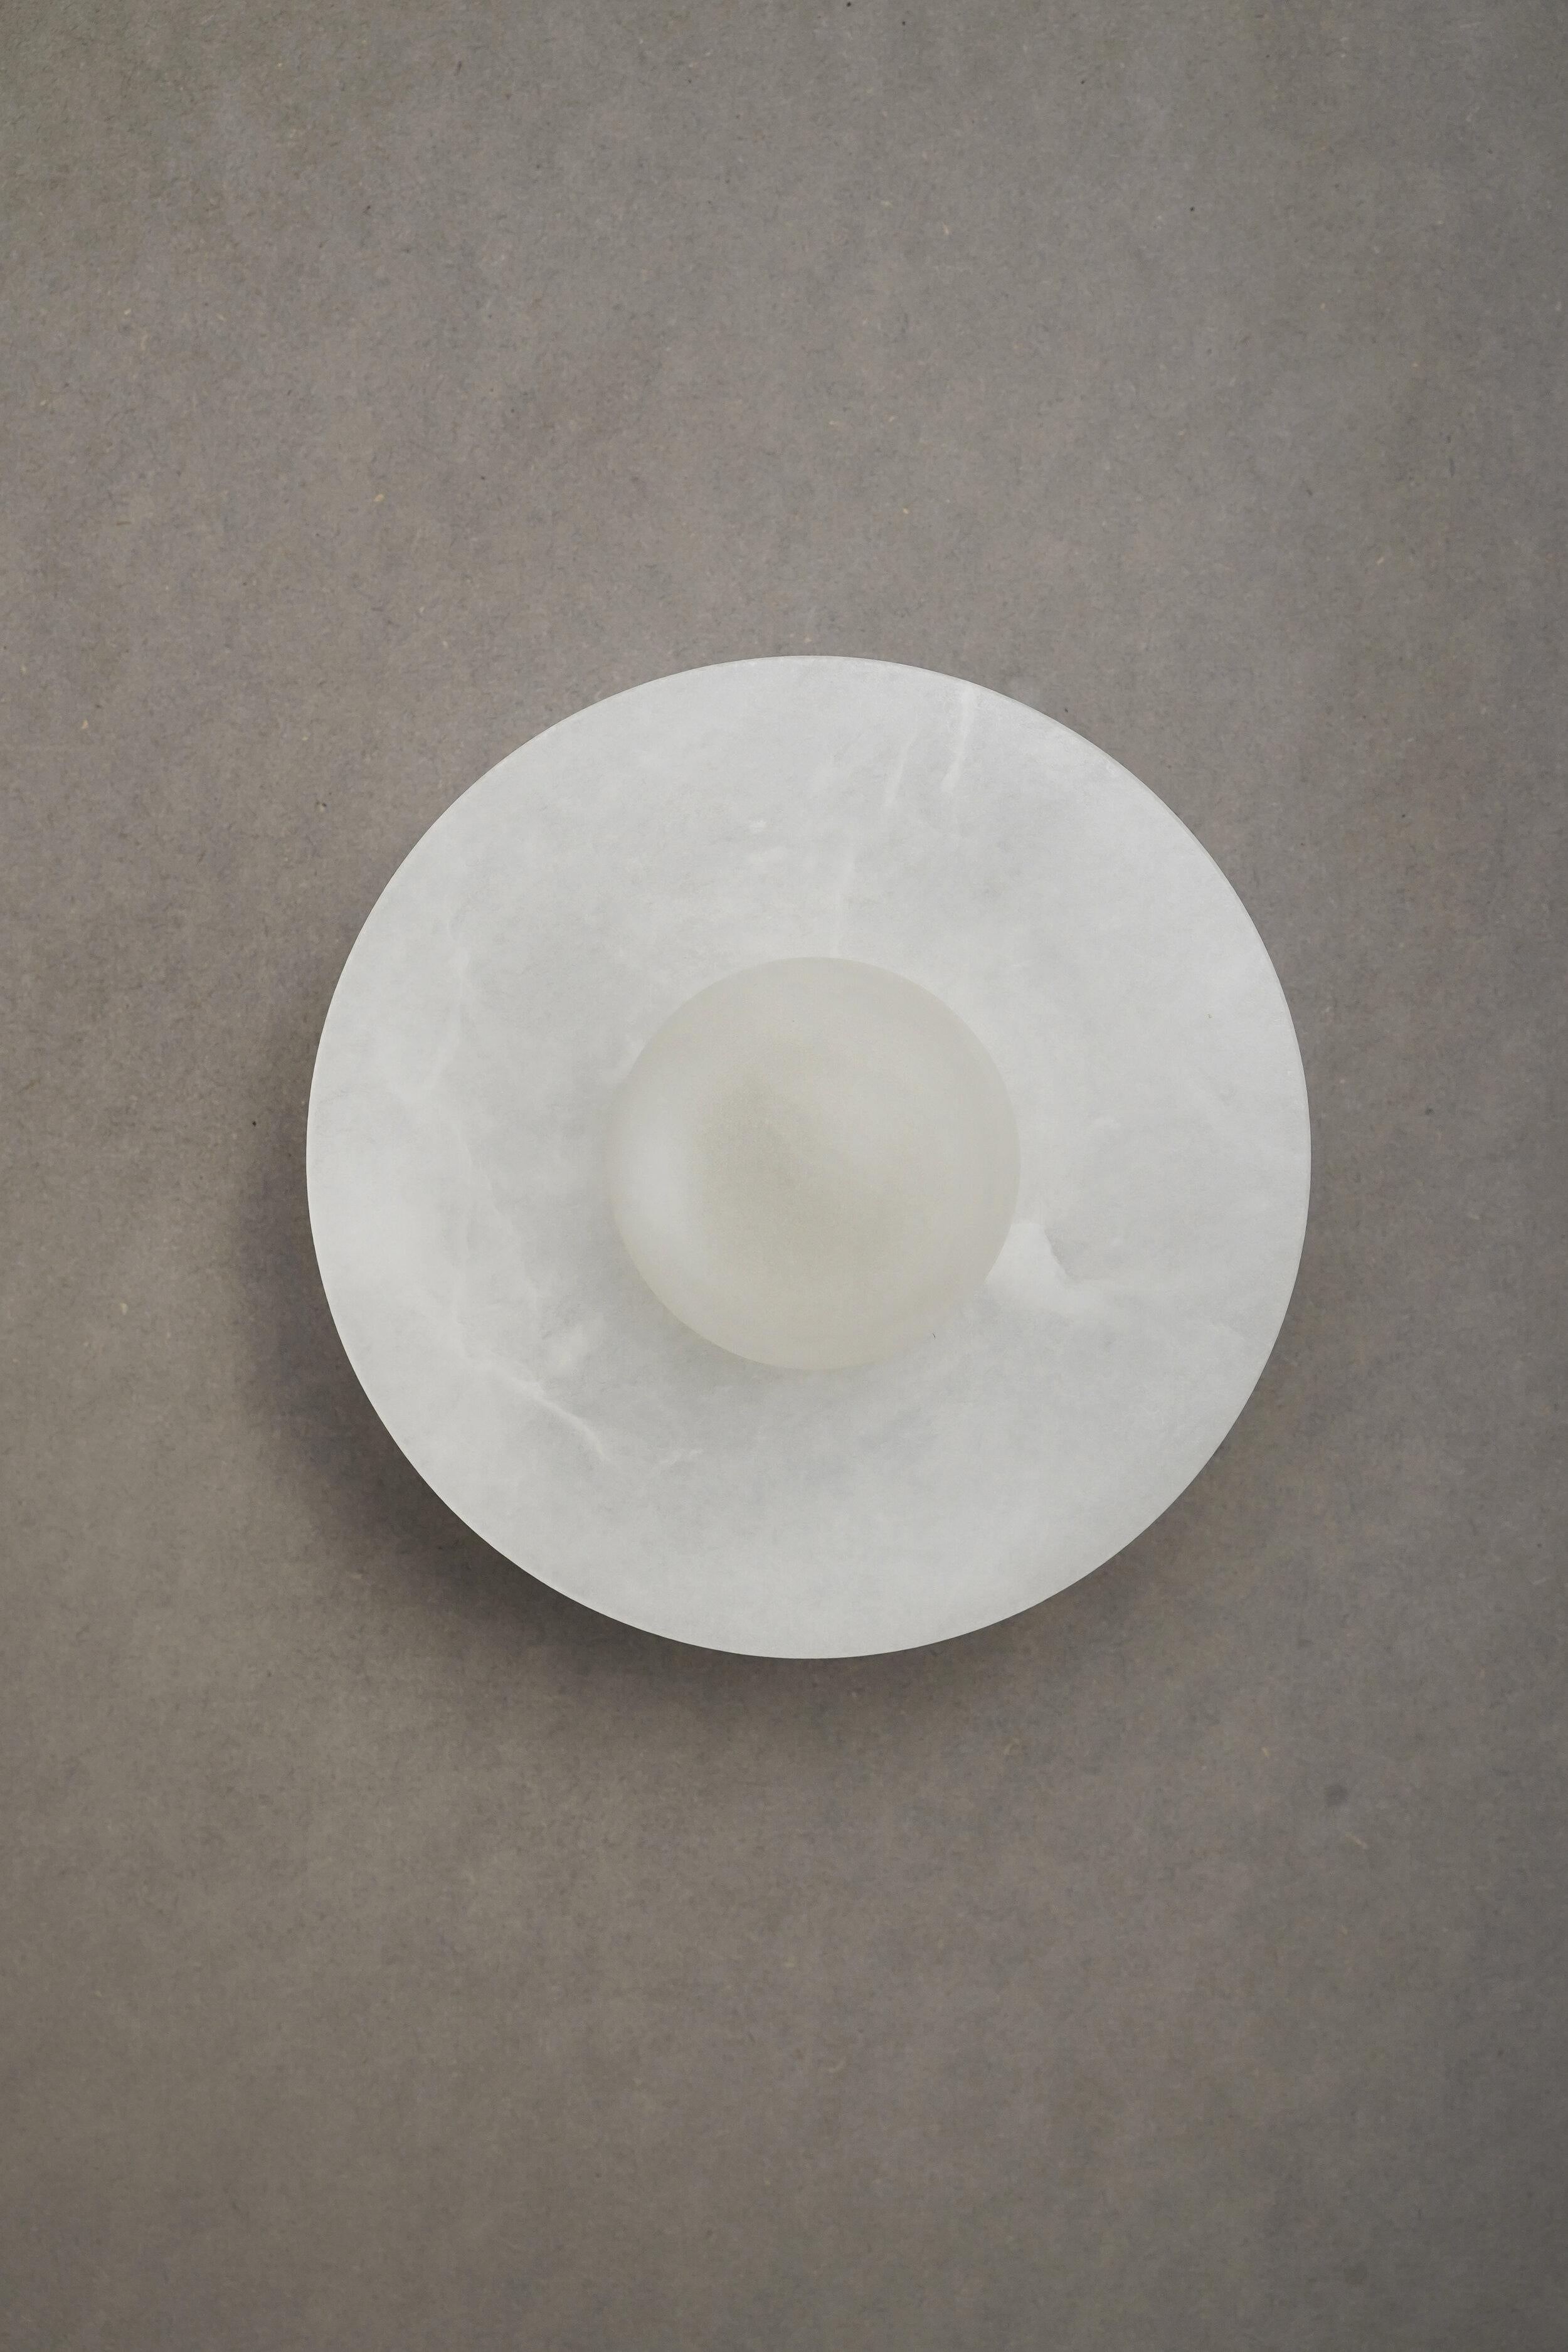 Alba Simple Wall Alabaster Light by Contain
Dimensions: D 15 x H 9.5 cm.
Materials: alabaster structure and optical lens.

All our lamps can be wired according to each country. If sold to the USA it will be wired for the USA for instance.

“You are